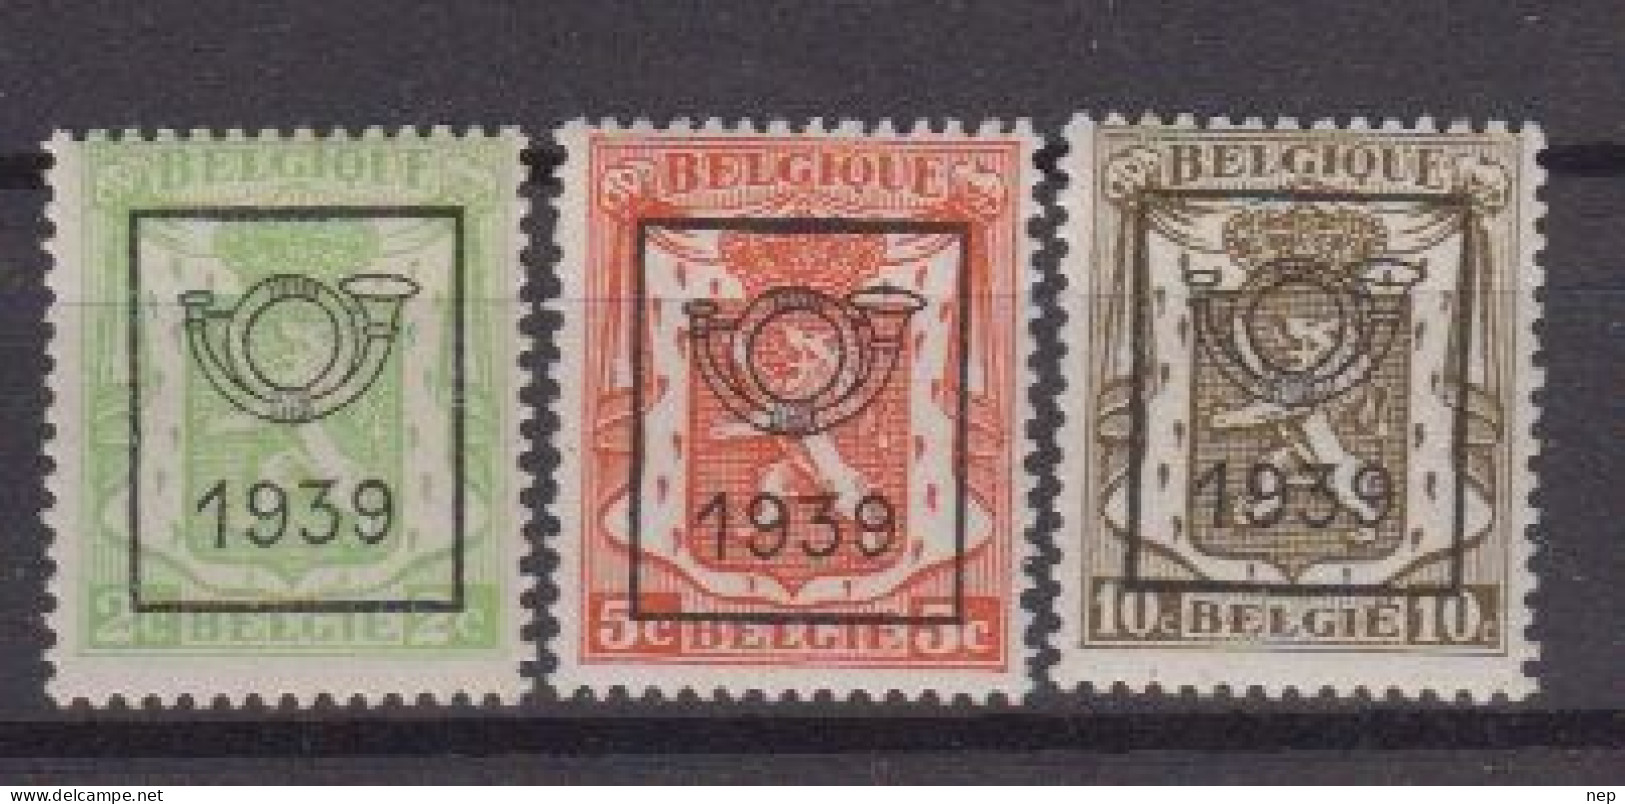 BELGIË - OBP - 1939 - PRE 417/19 (15 Type C) - MNH** - Typo Precancels 1936-51 (Small Seal Of The State)